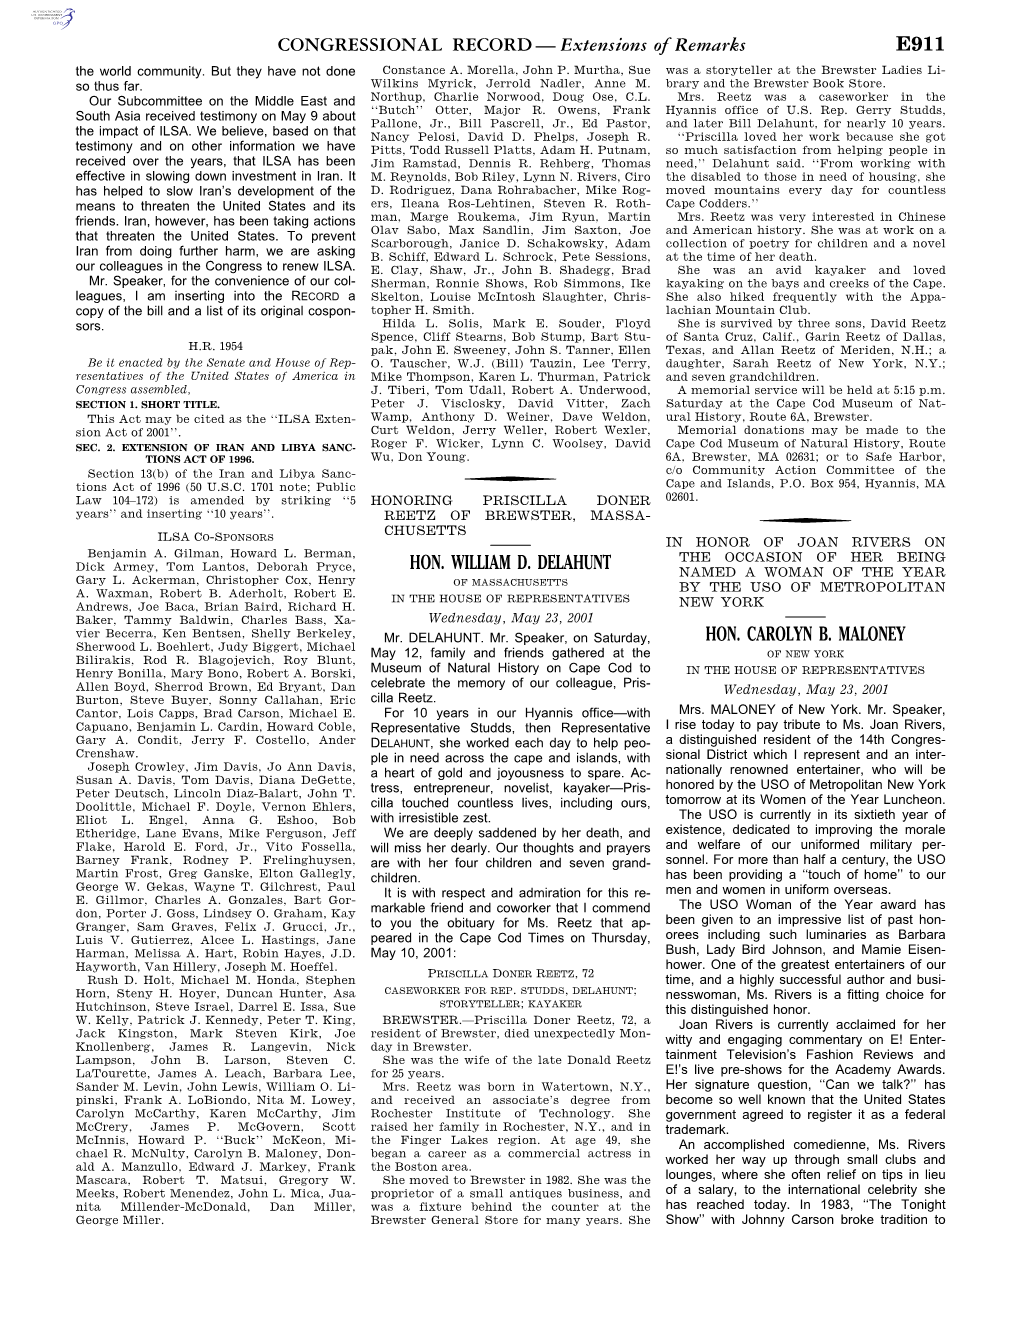 CONGRESSIONAL RECORD— Extensions of Remarks E911 HON. WILLIAM D. DELAHUNT HON. CAROLYN B. MALONEY